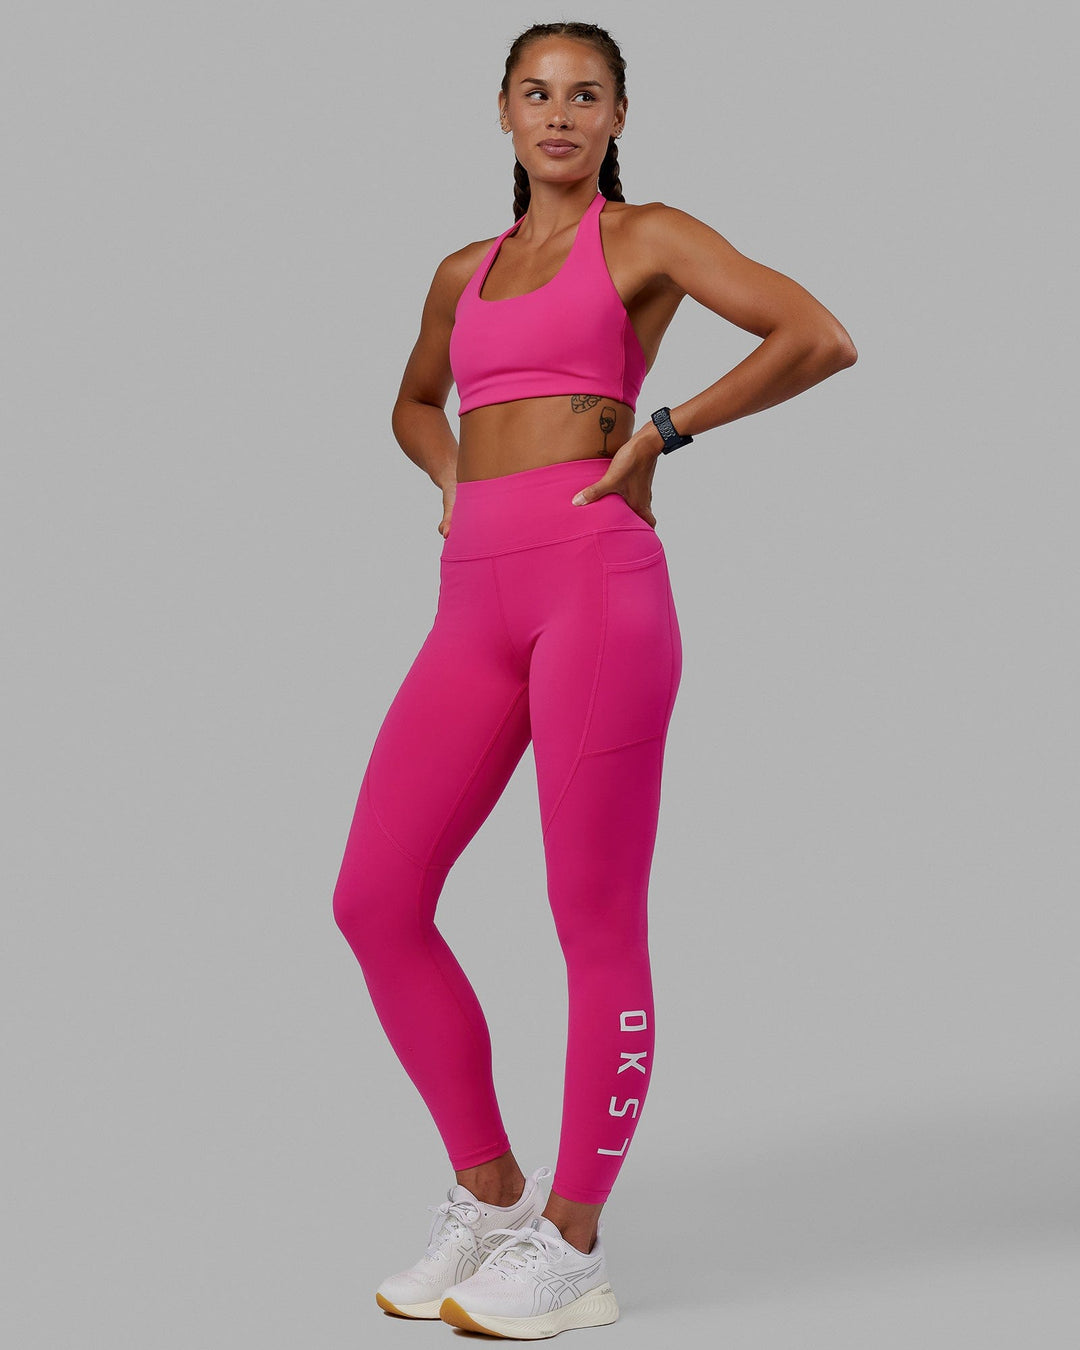 Woman wearing Rep Full Length Tights - Ultra Pink-White